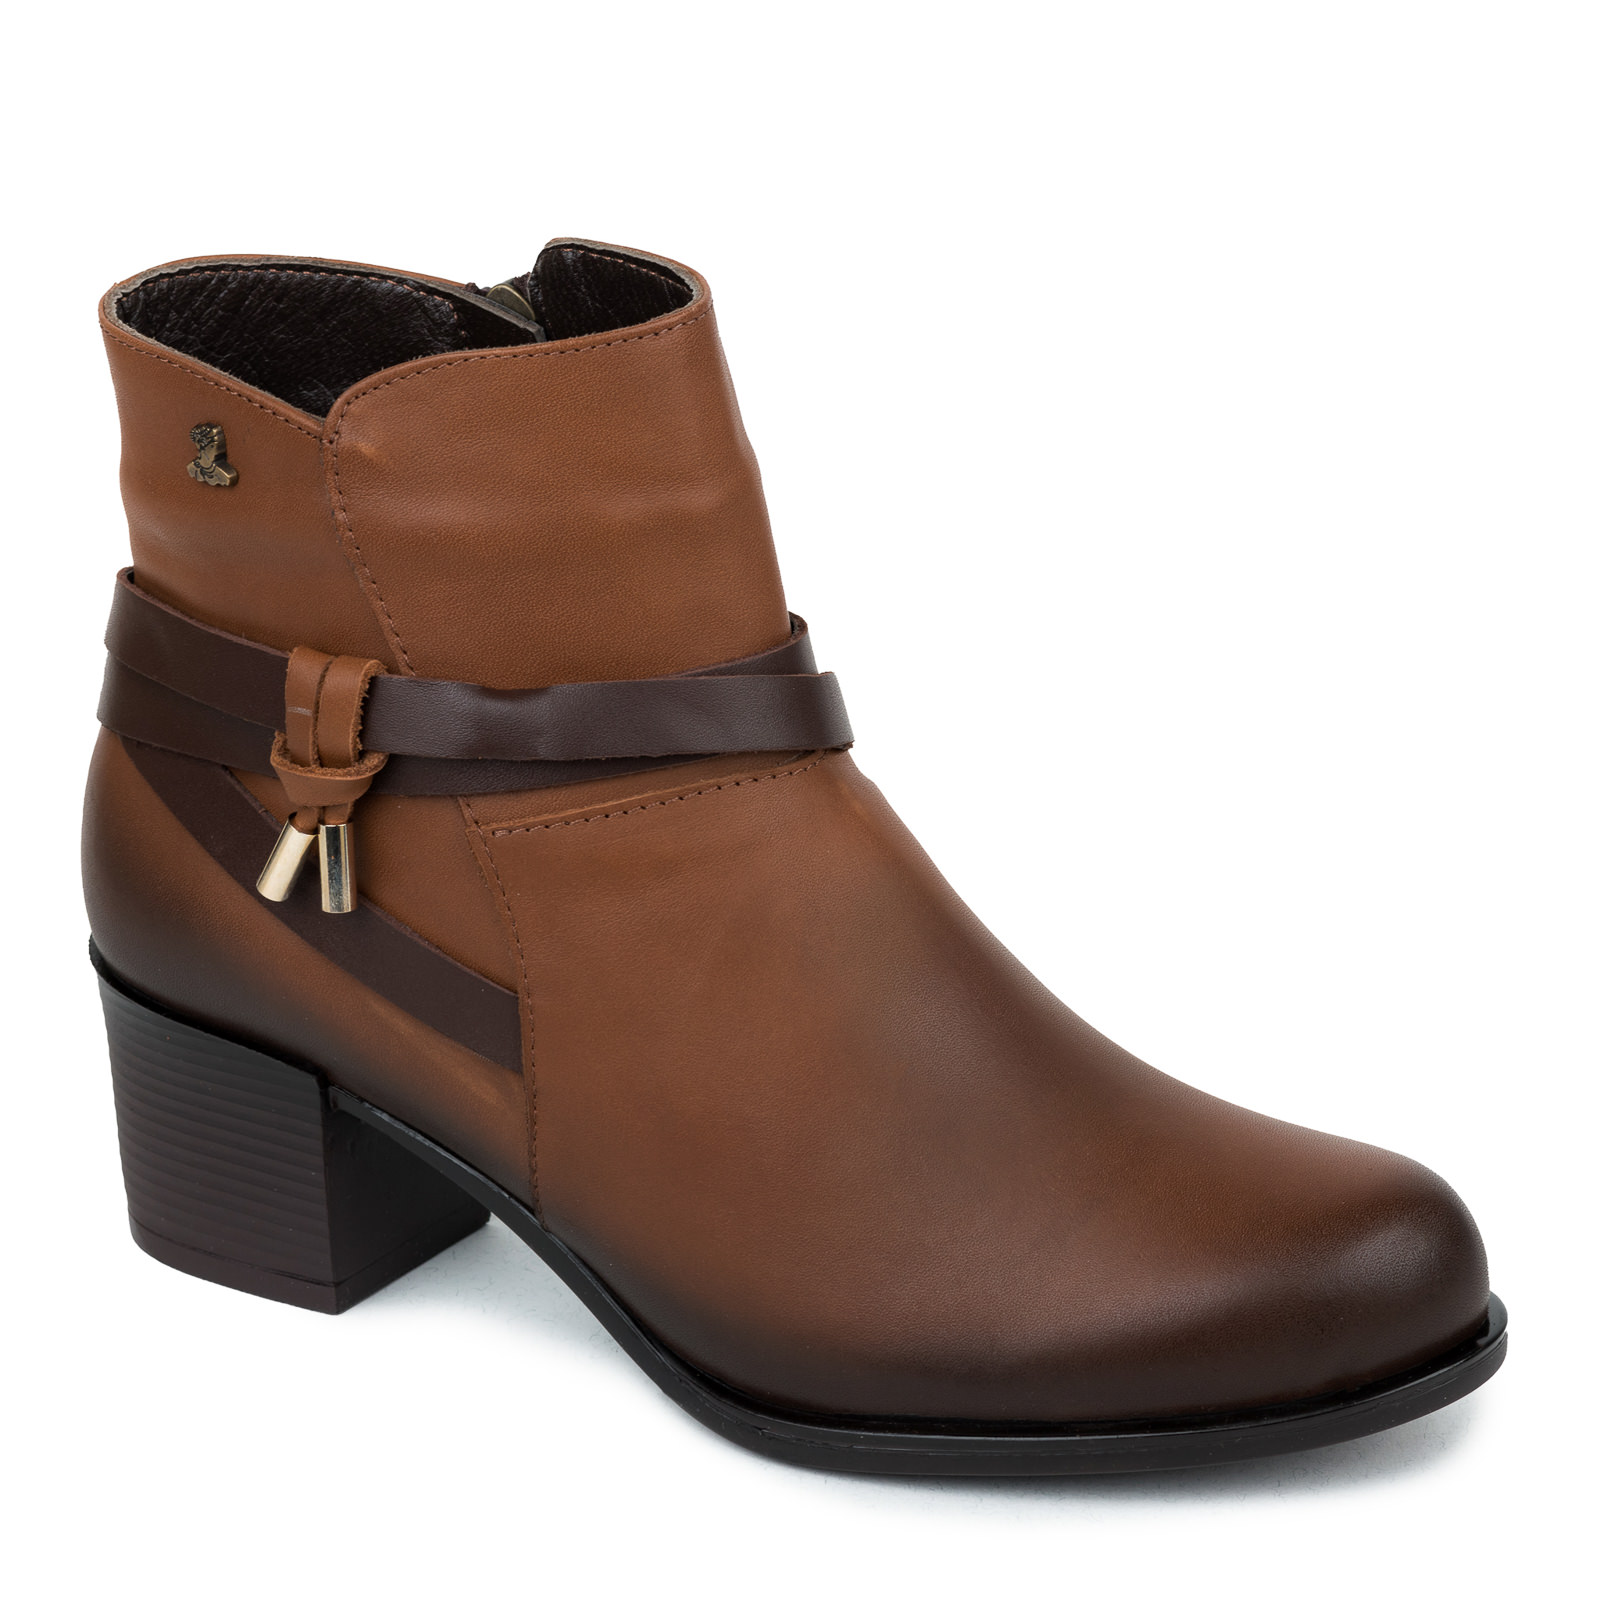 Leather ankle boots B438 - CAMEL